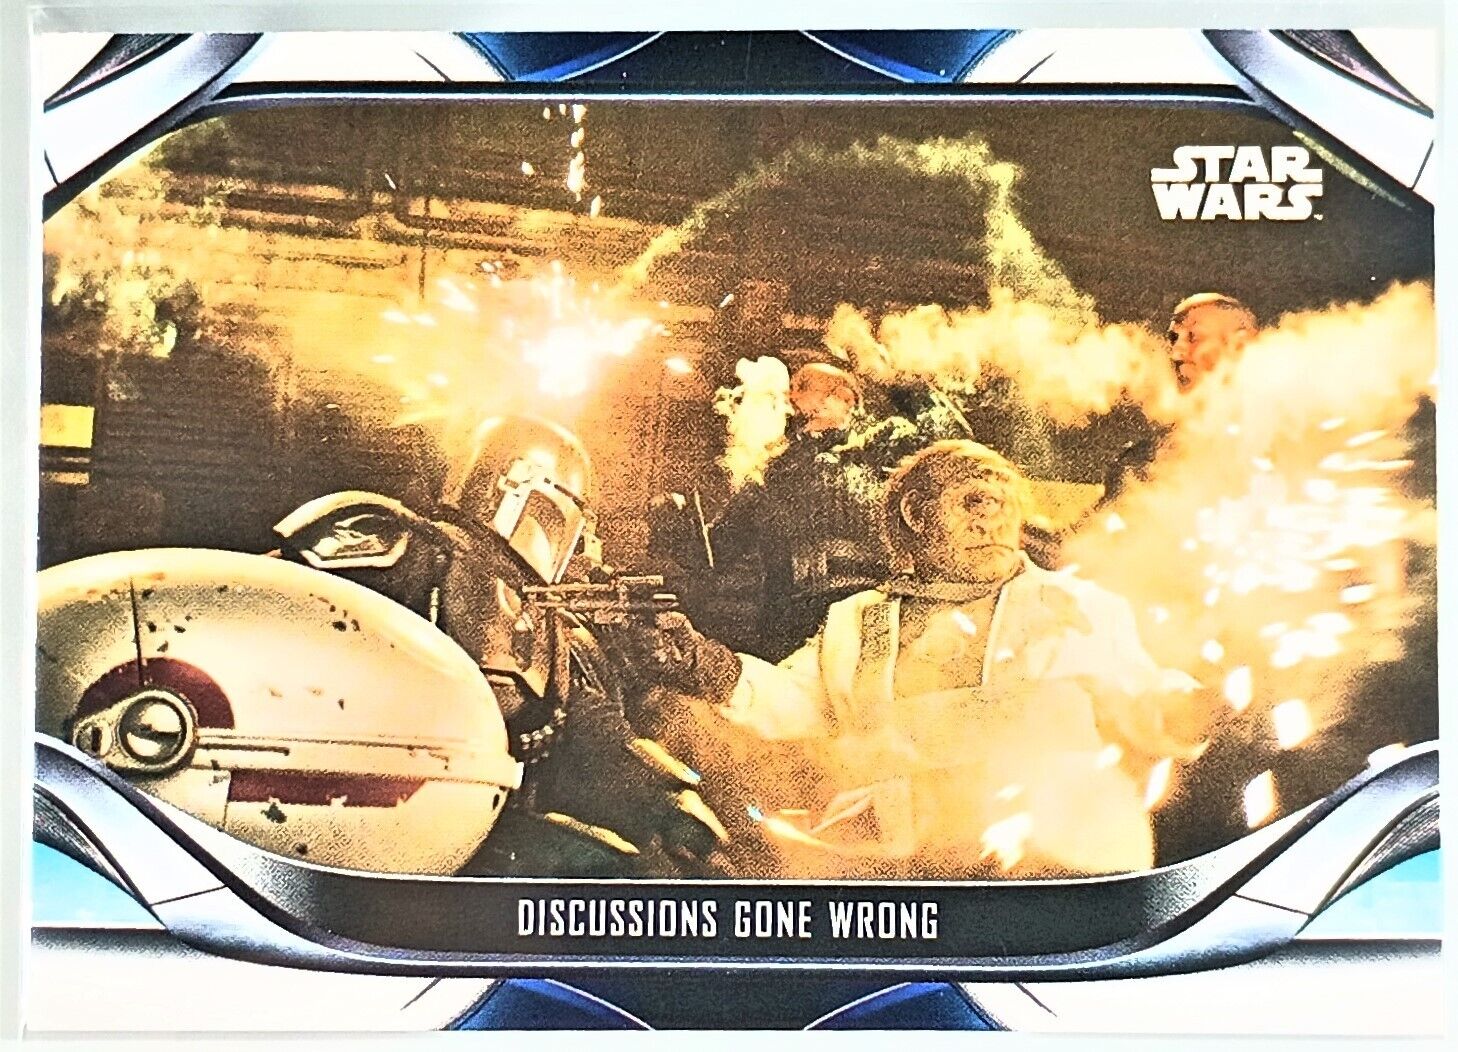 Topps Star Wars UK The Mandalorian Base Card #80 DISCUSSIONS GONE WRONG